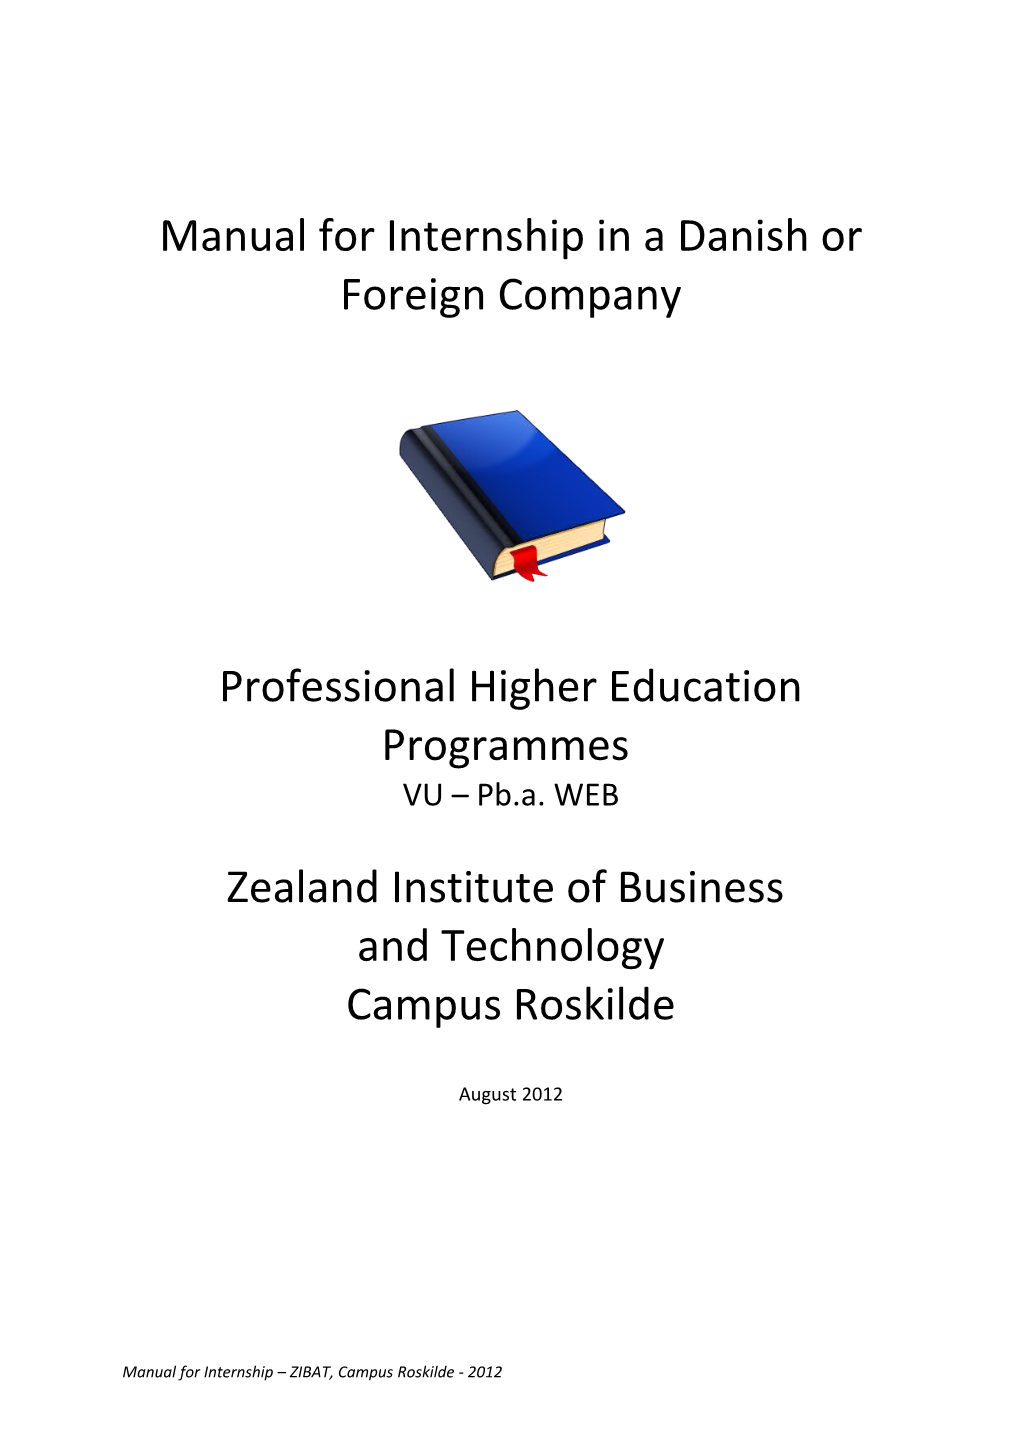 Manual for Internship in a Danish Or Foreign Company